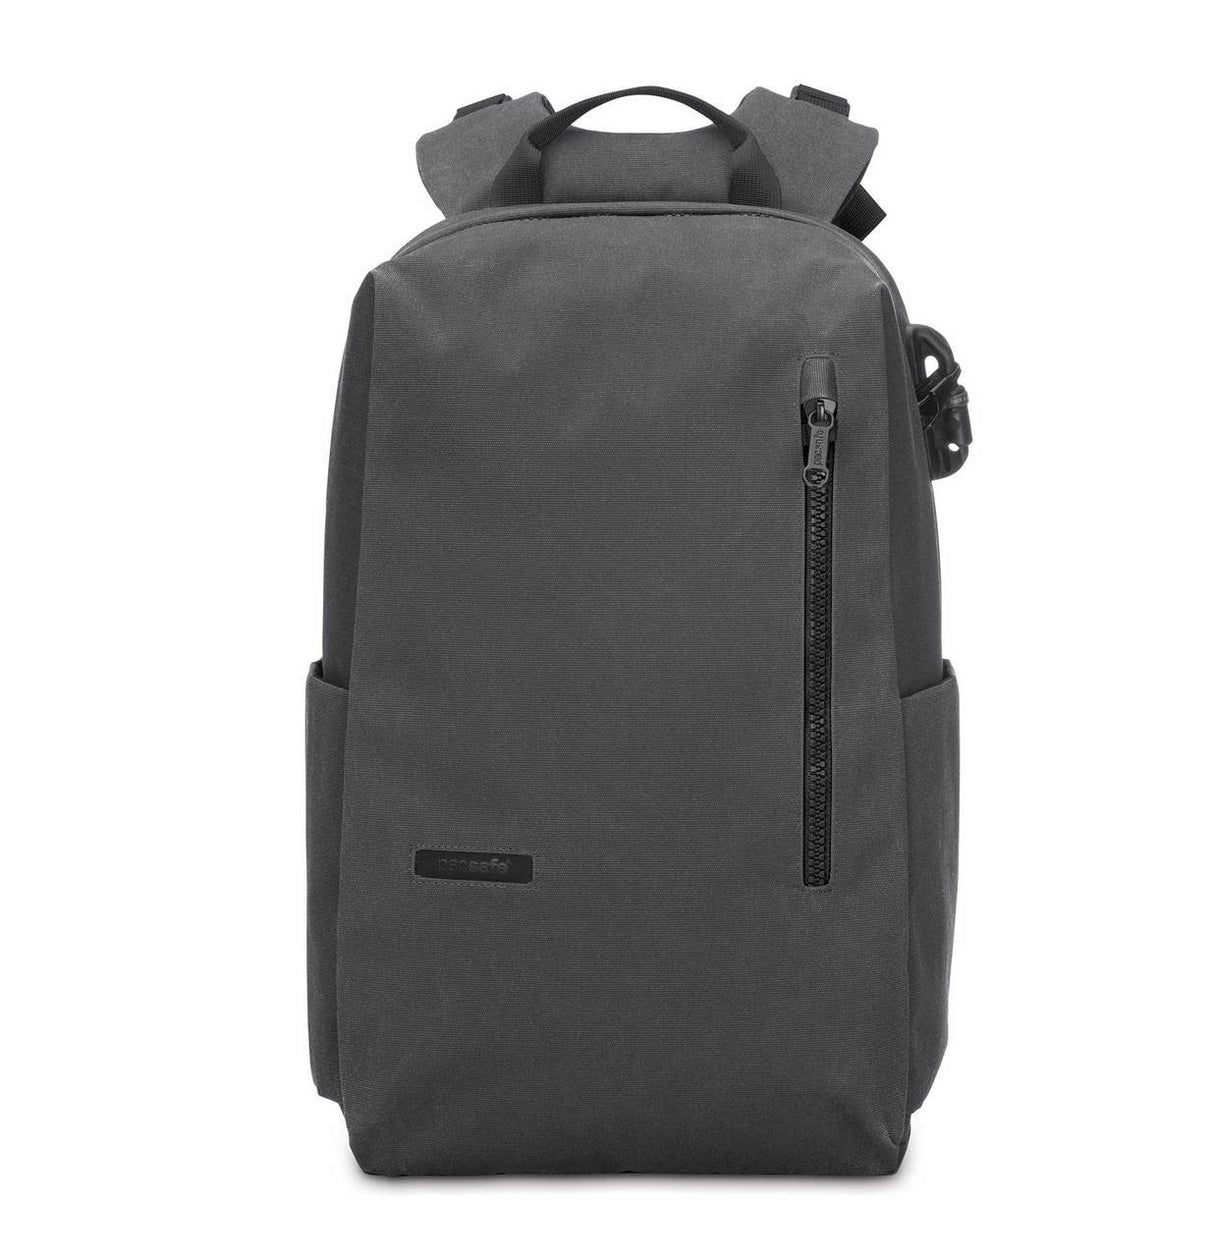 Pacsafe Intasafe 20L Backpack, charcoal